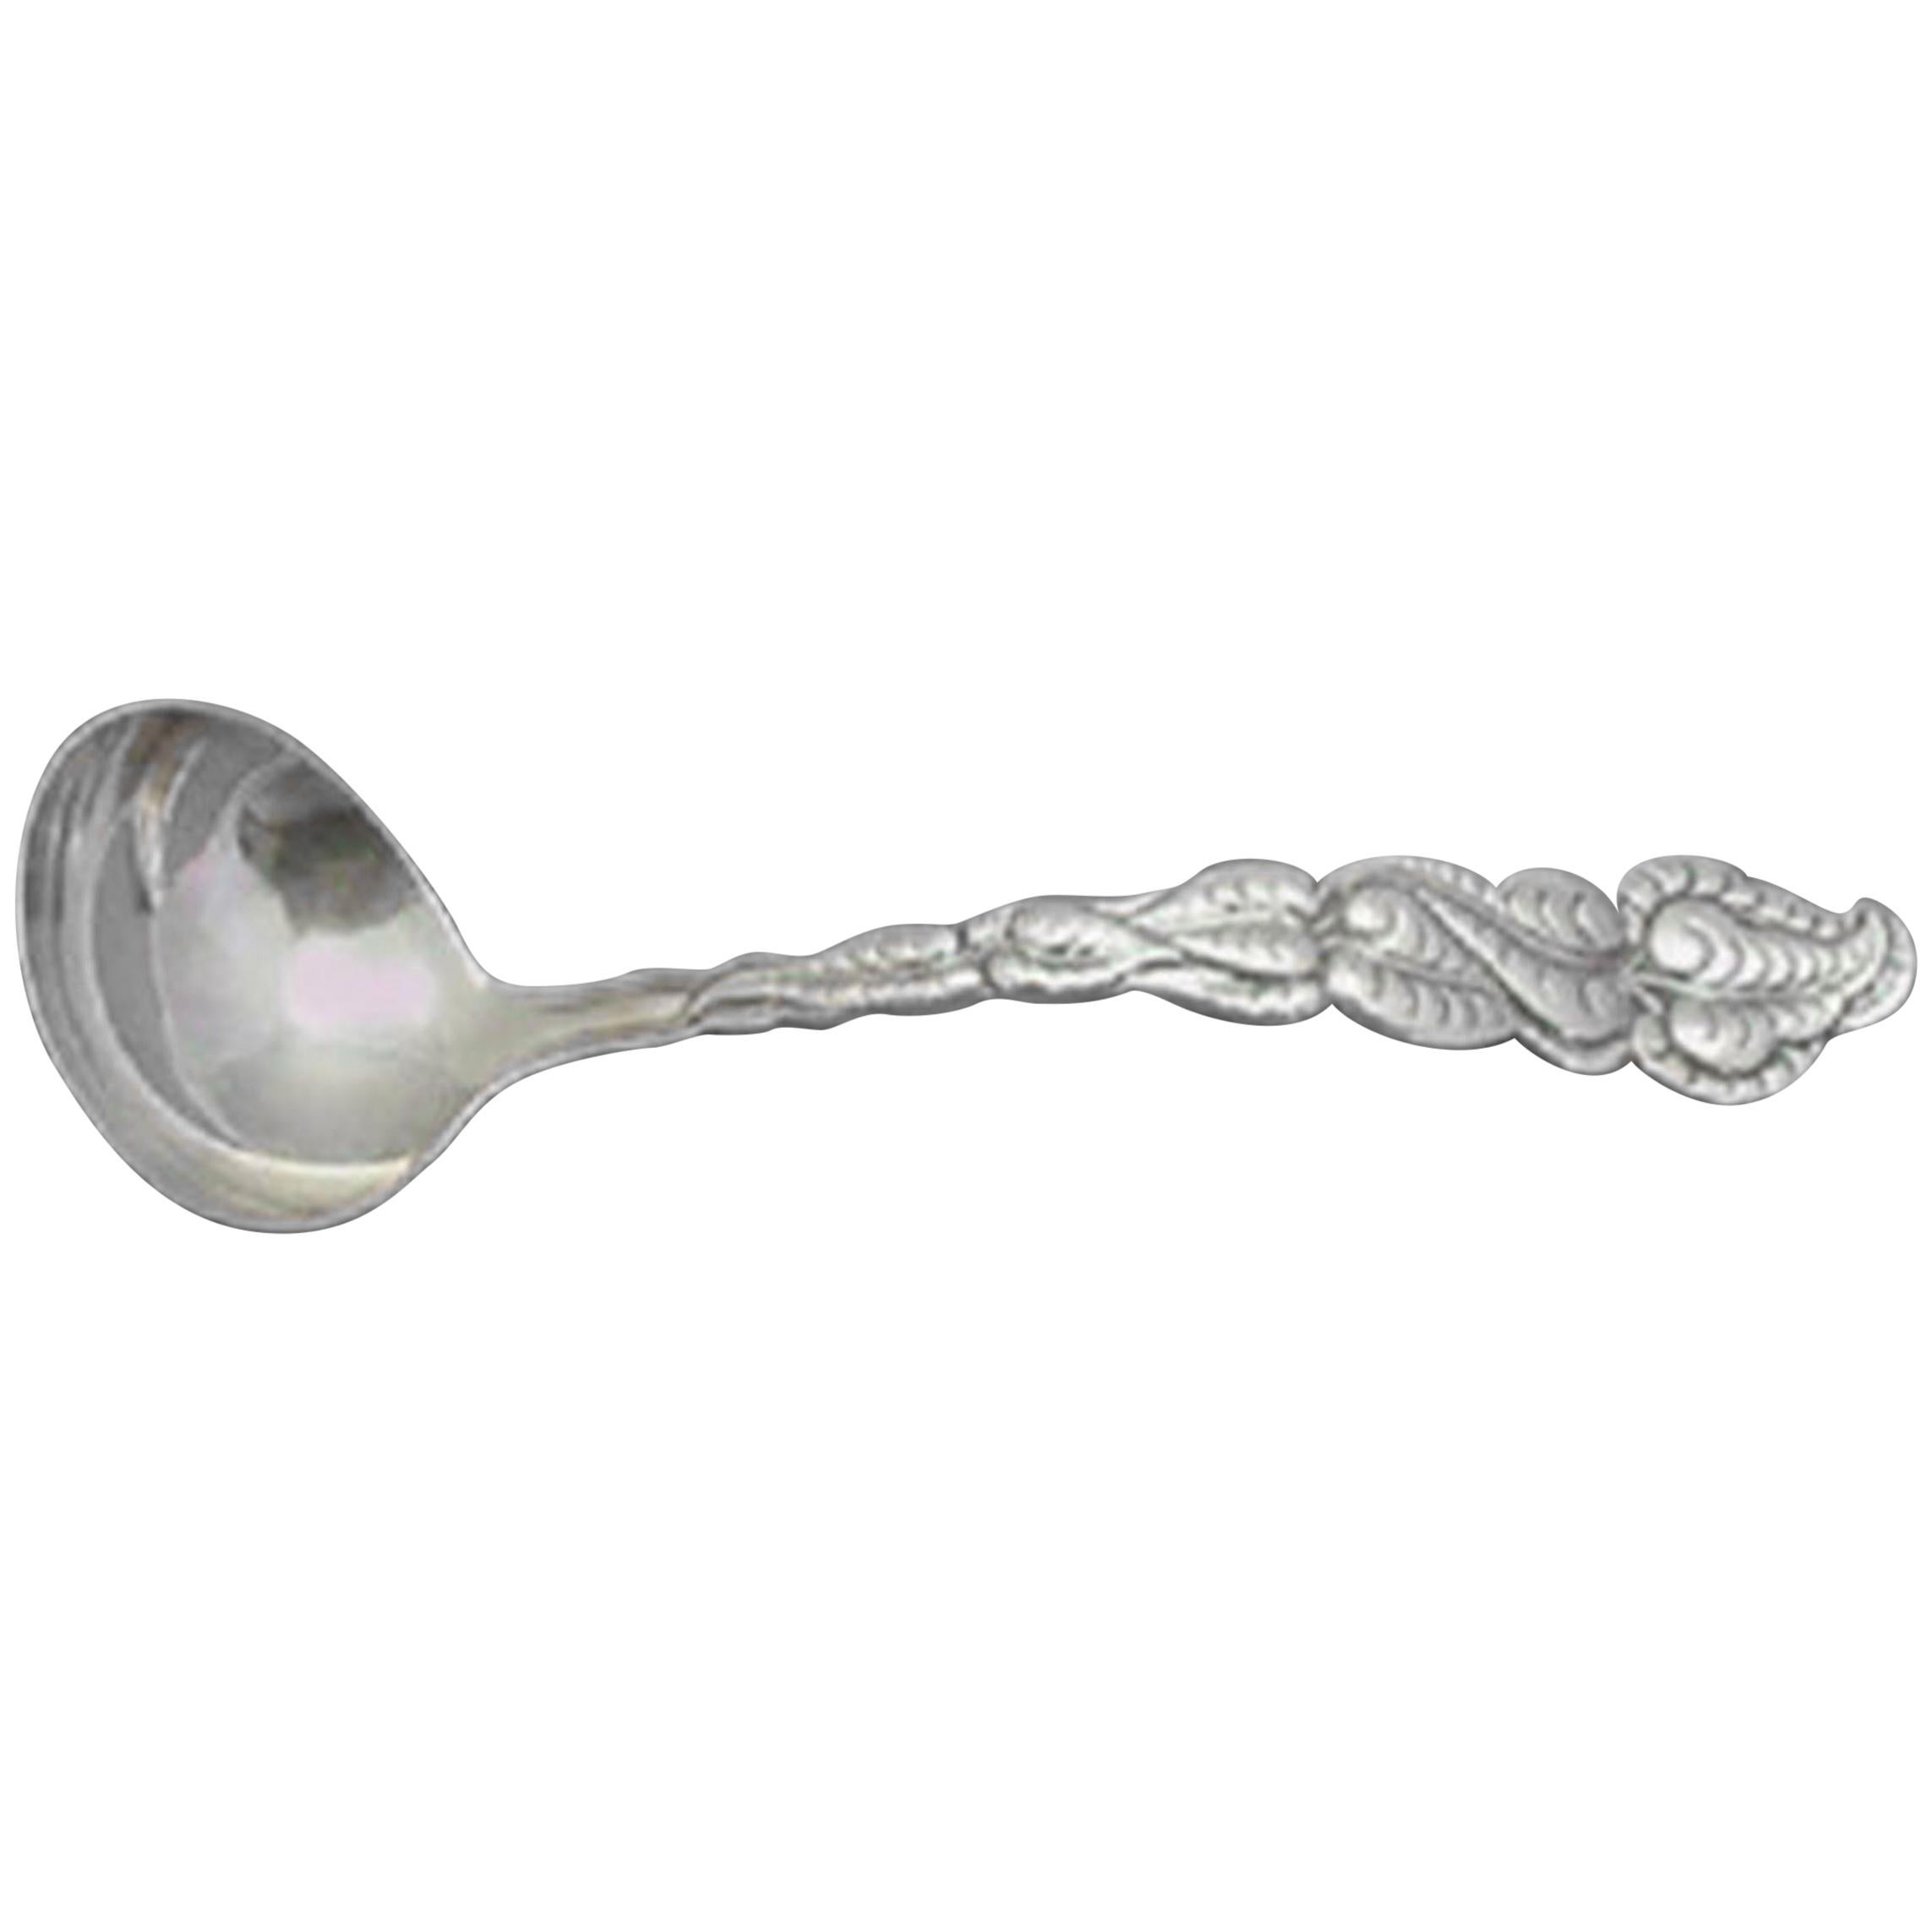 Ailanthus by Tiffany & Co Sterling Silver Gravy Ladle Serving